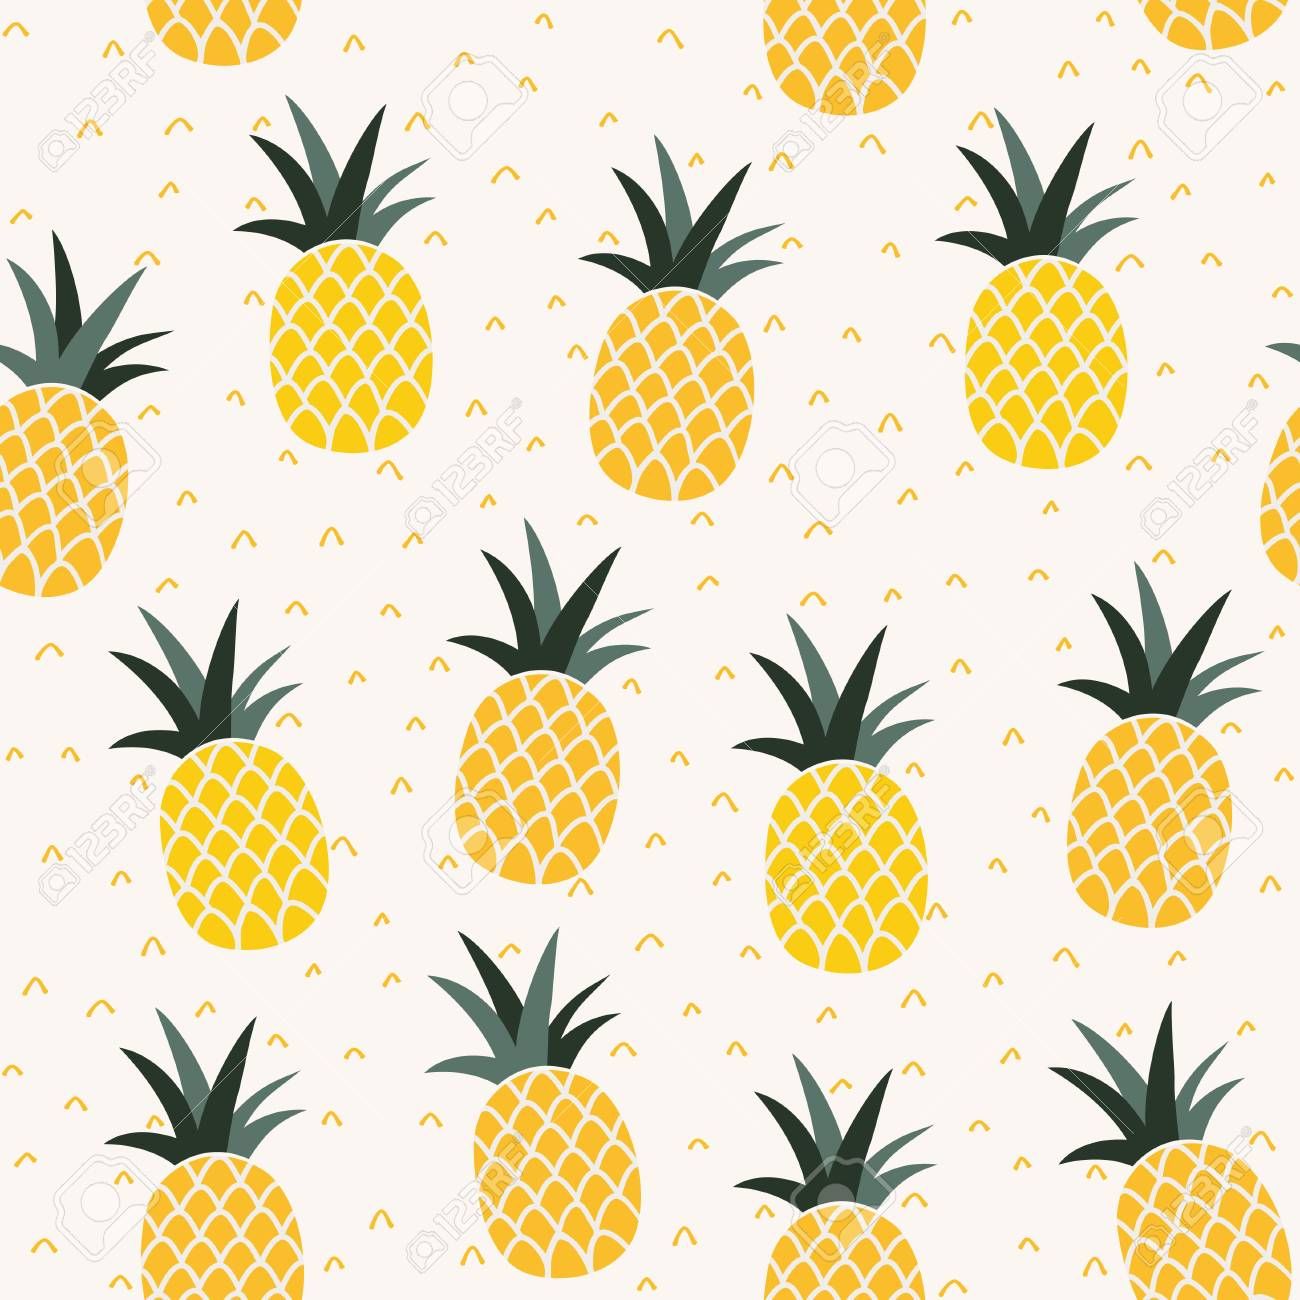 Cool Pineapple Wallpapers on